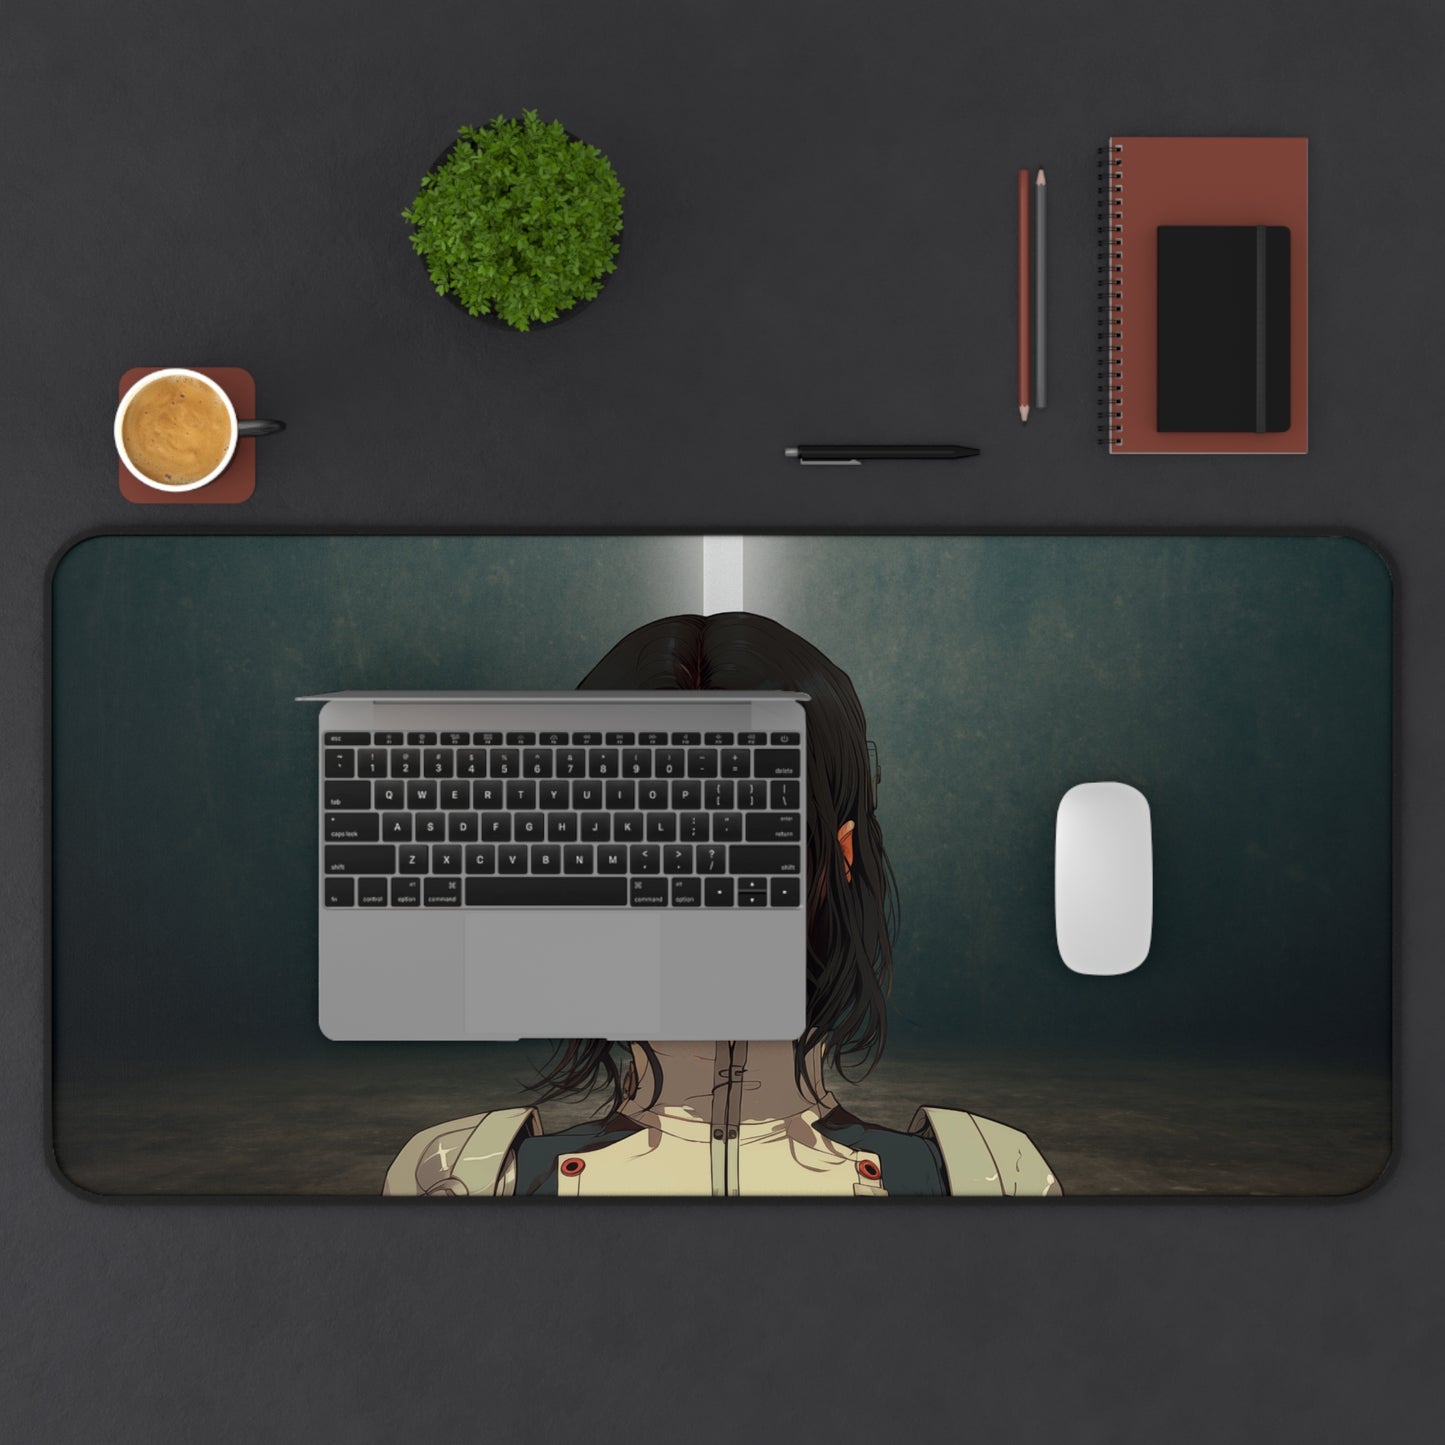 Cyborg Girl Gaming Large Mouse Pad